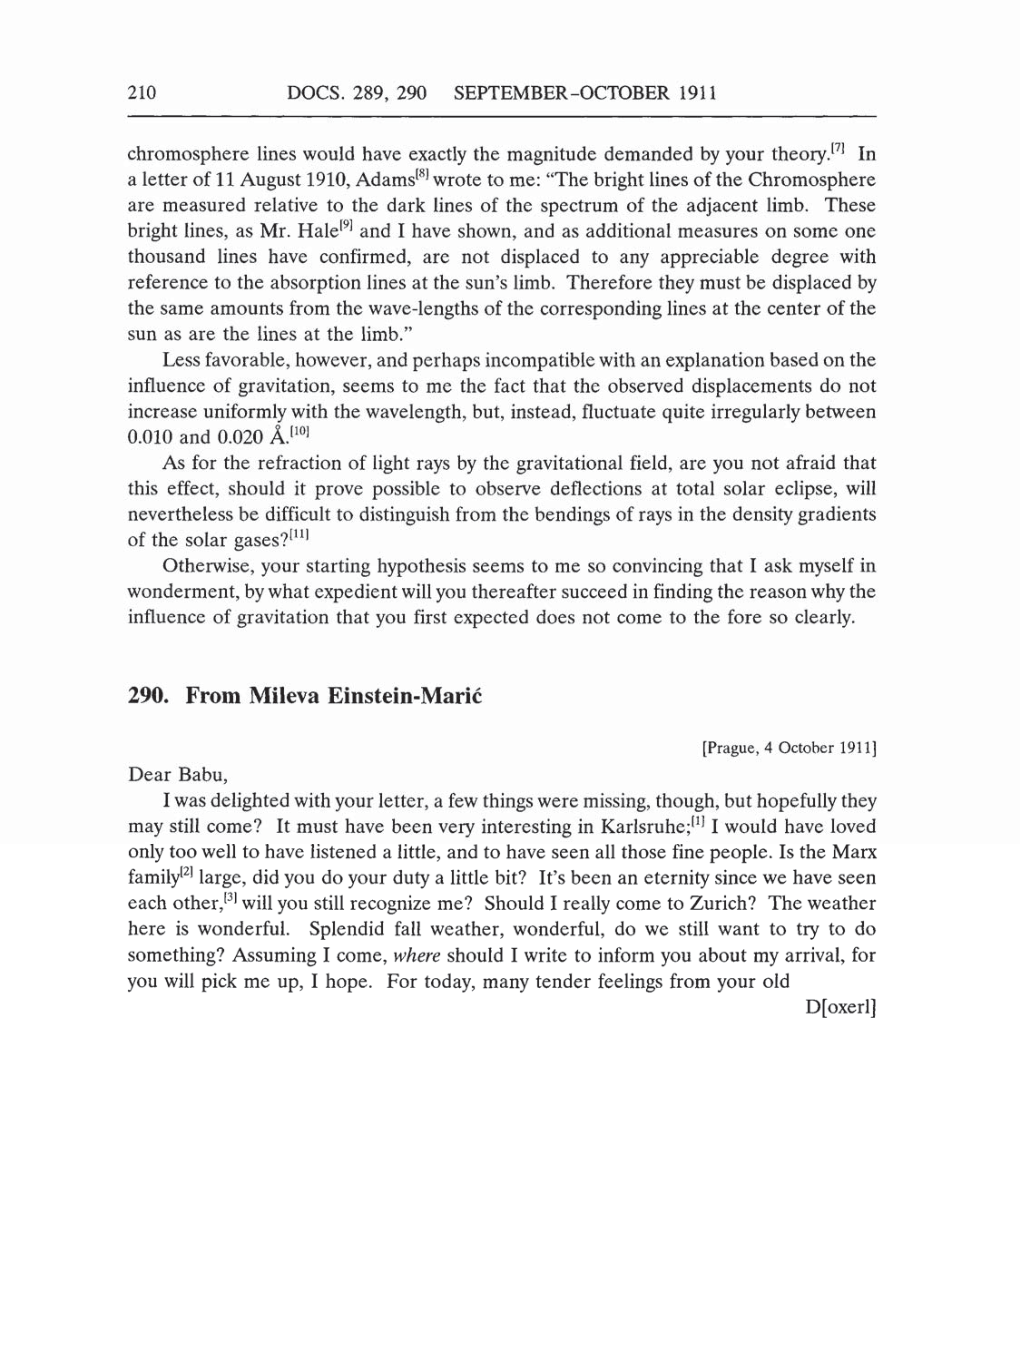 Volume 5: The Swiss Years: Correspondence, 1902-1914 (English translation supplement) page 210